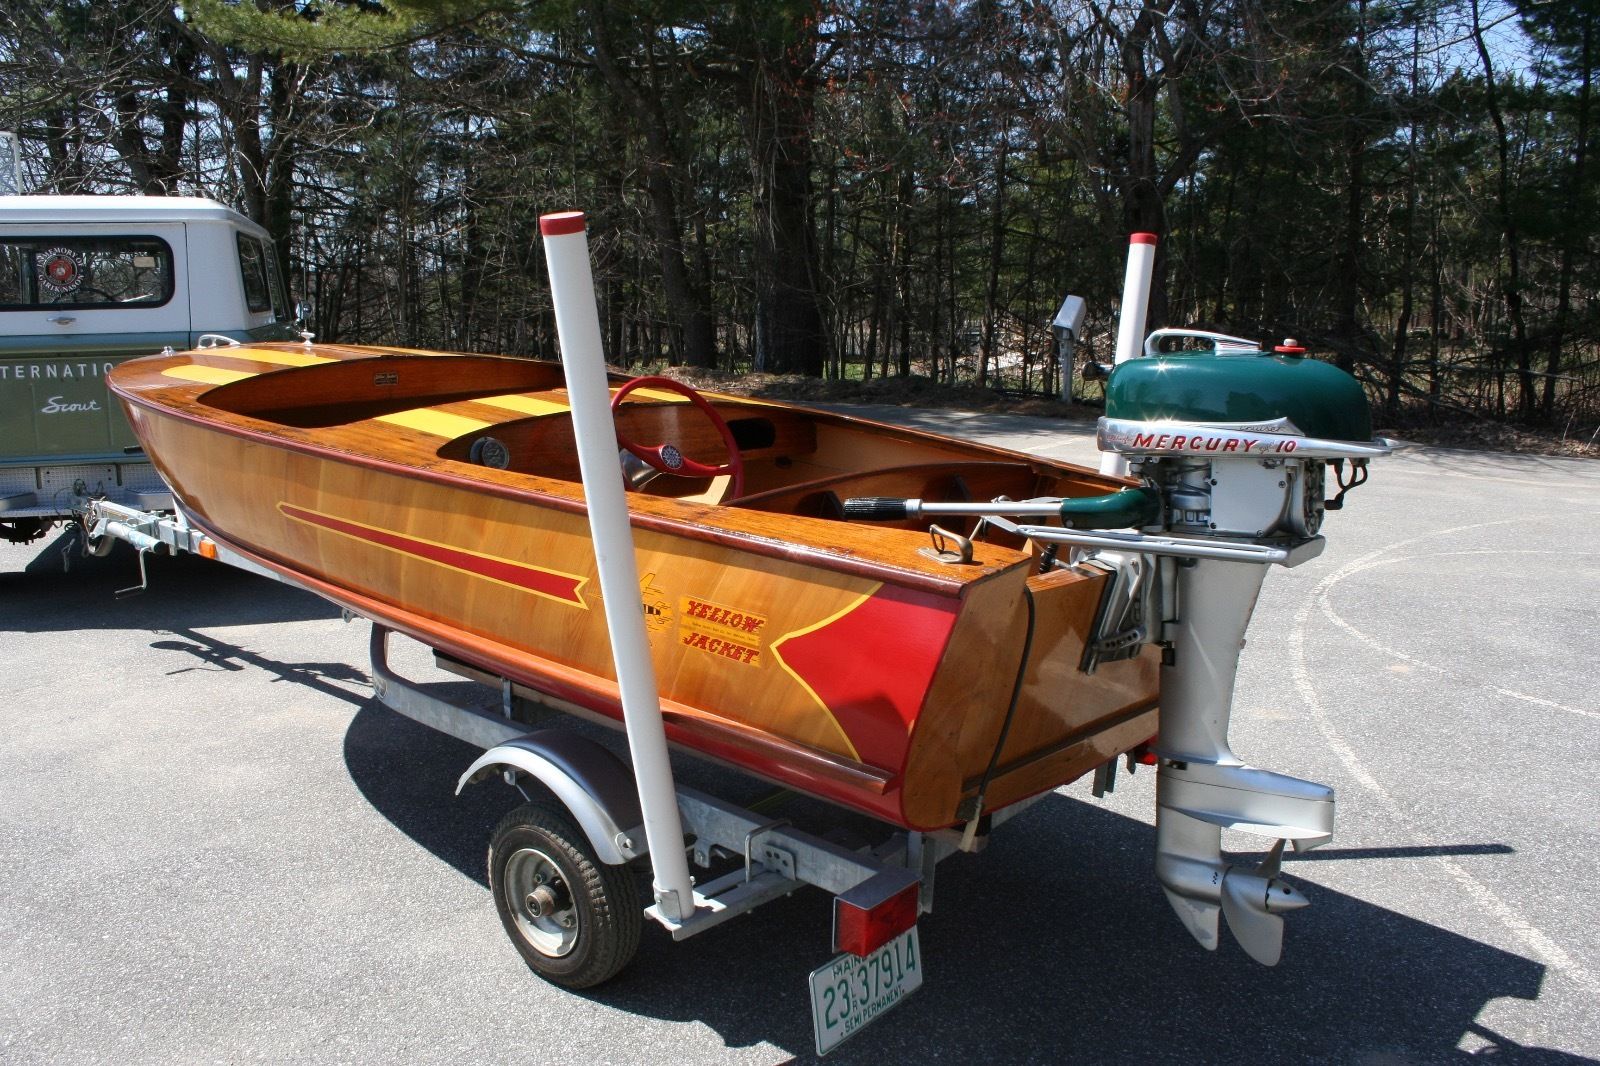 Yellow Jacket Runabout 1955 for sale for $7,500 - Boats-from-USA.com